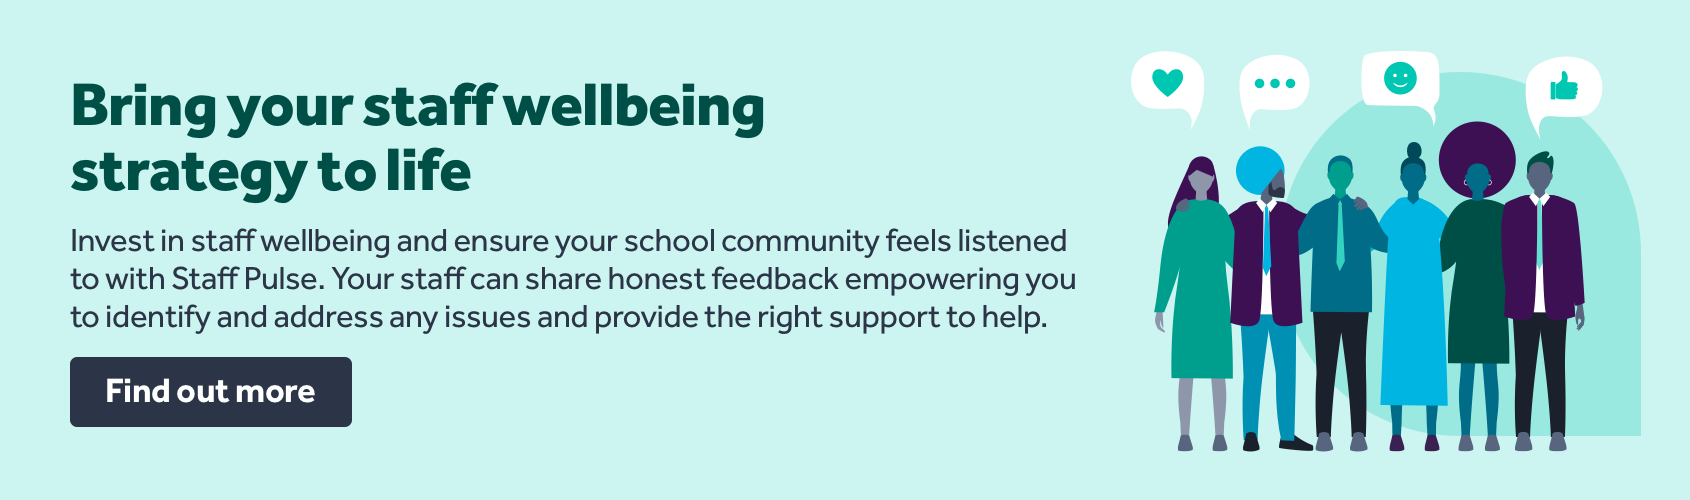 Tes wellbeing - Staff Pulse 